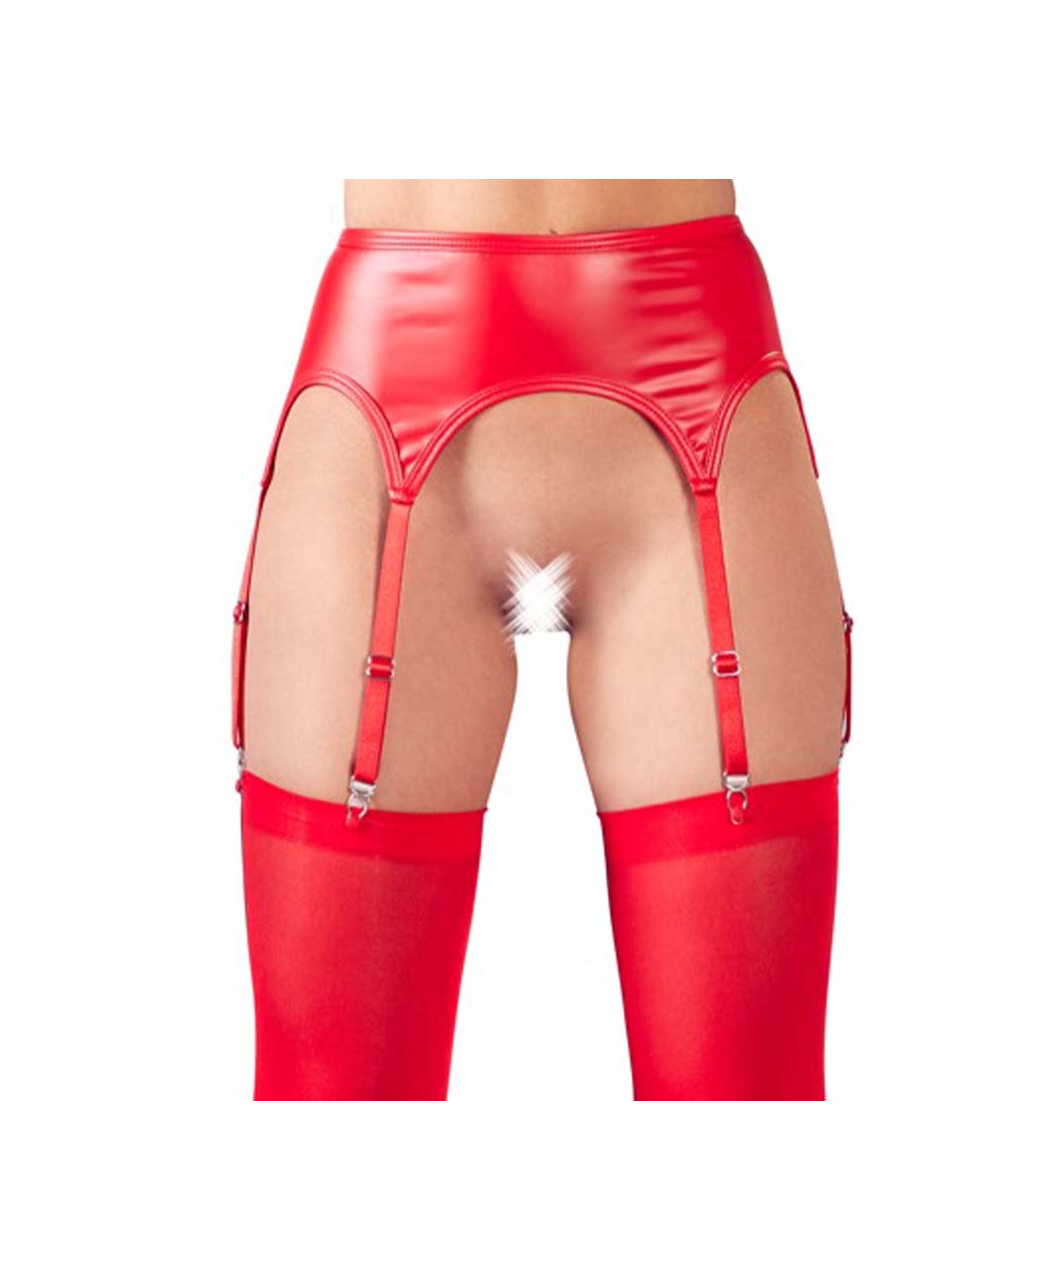 NO:XQSE red matte look garter belt with stockings